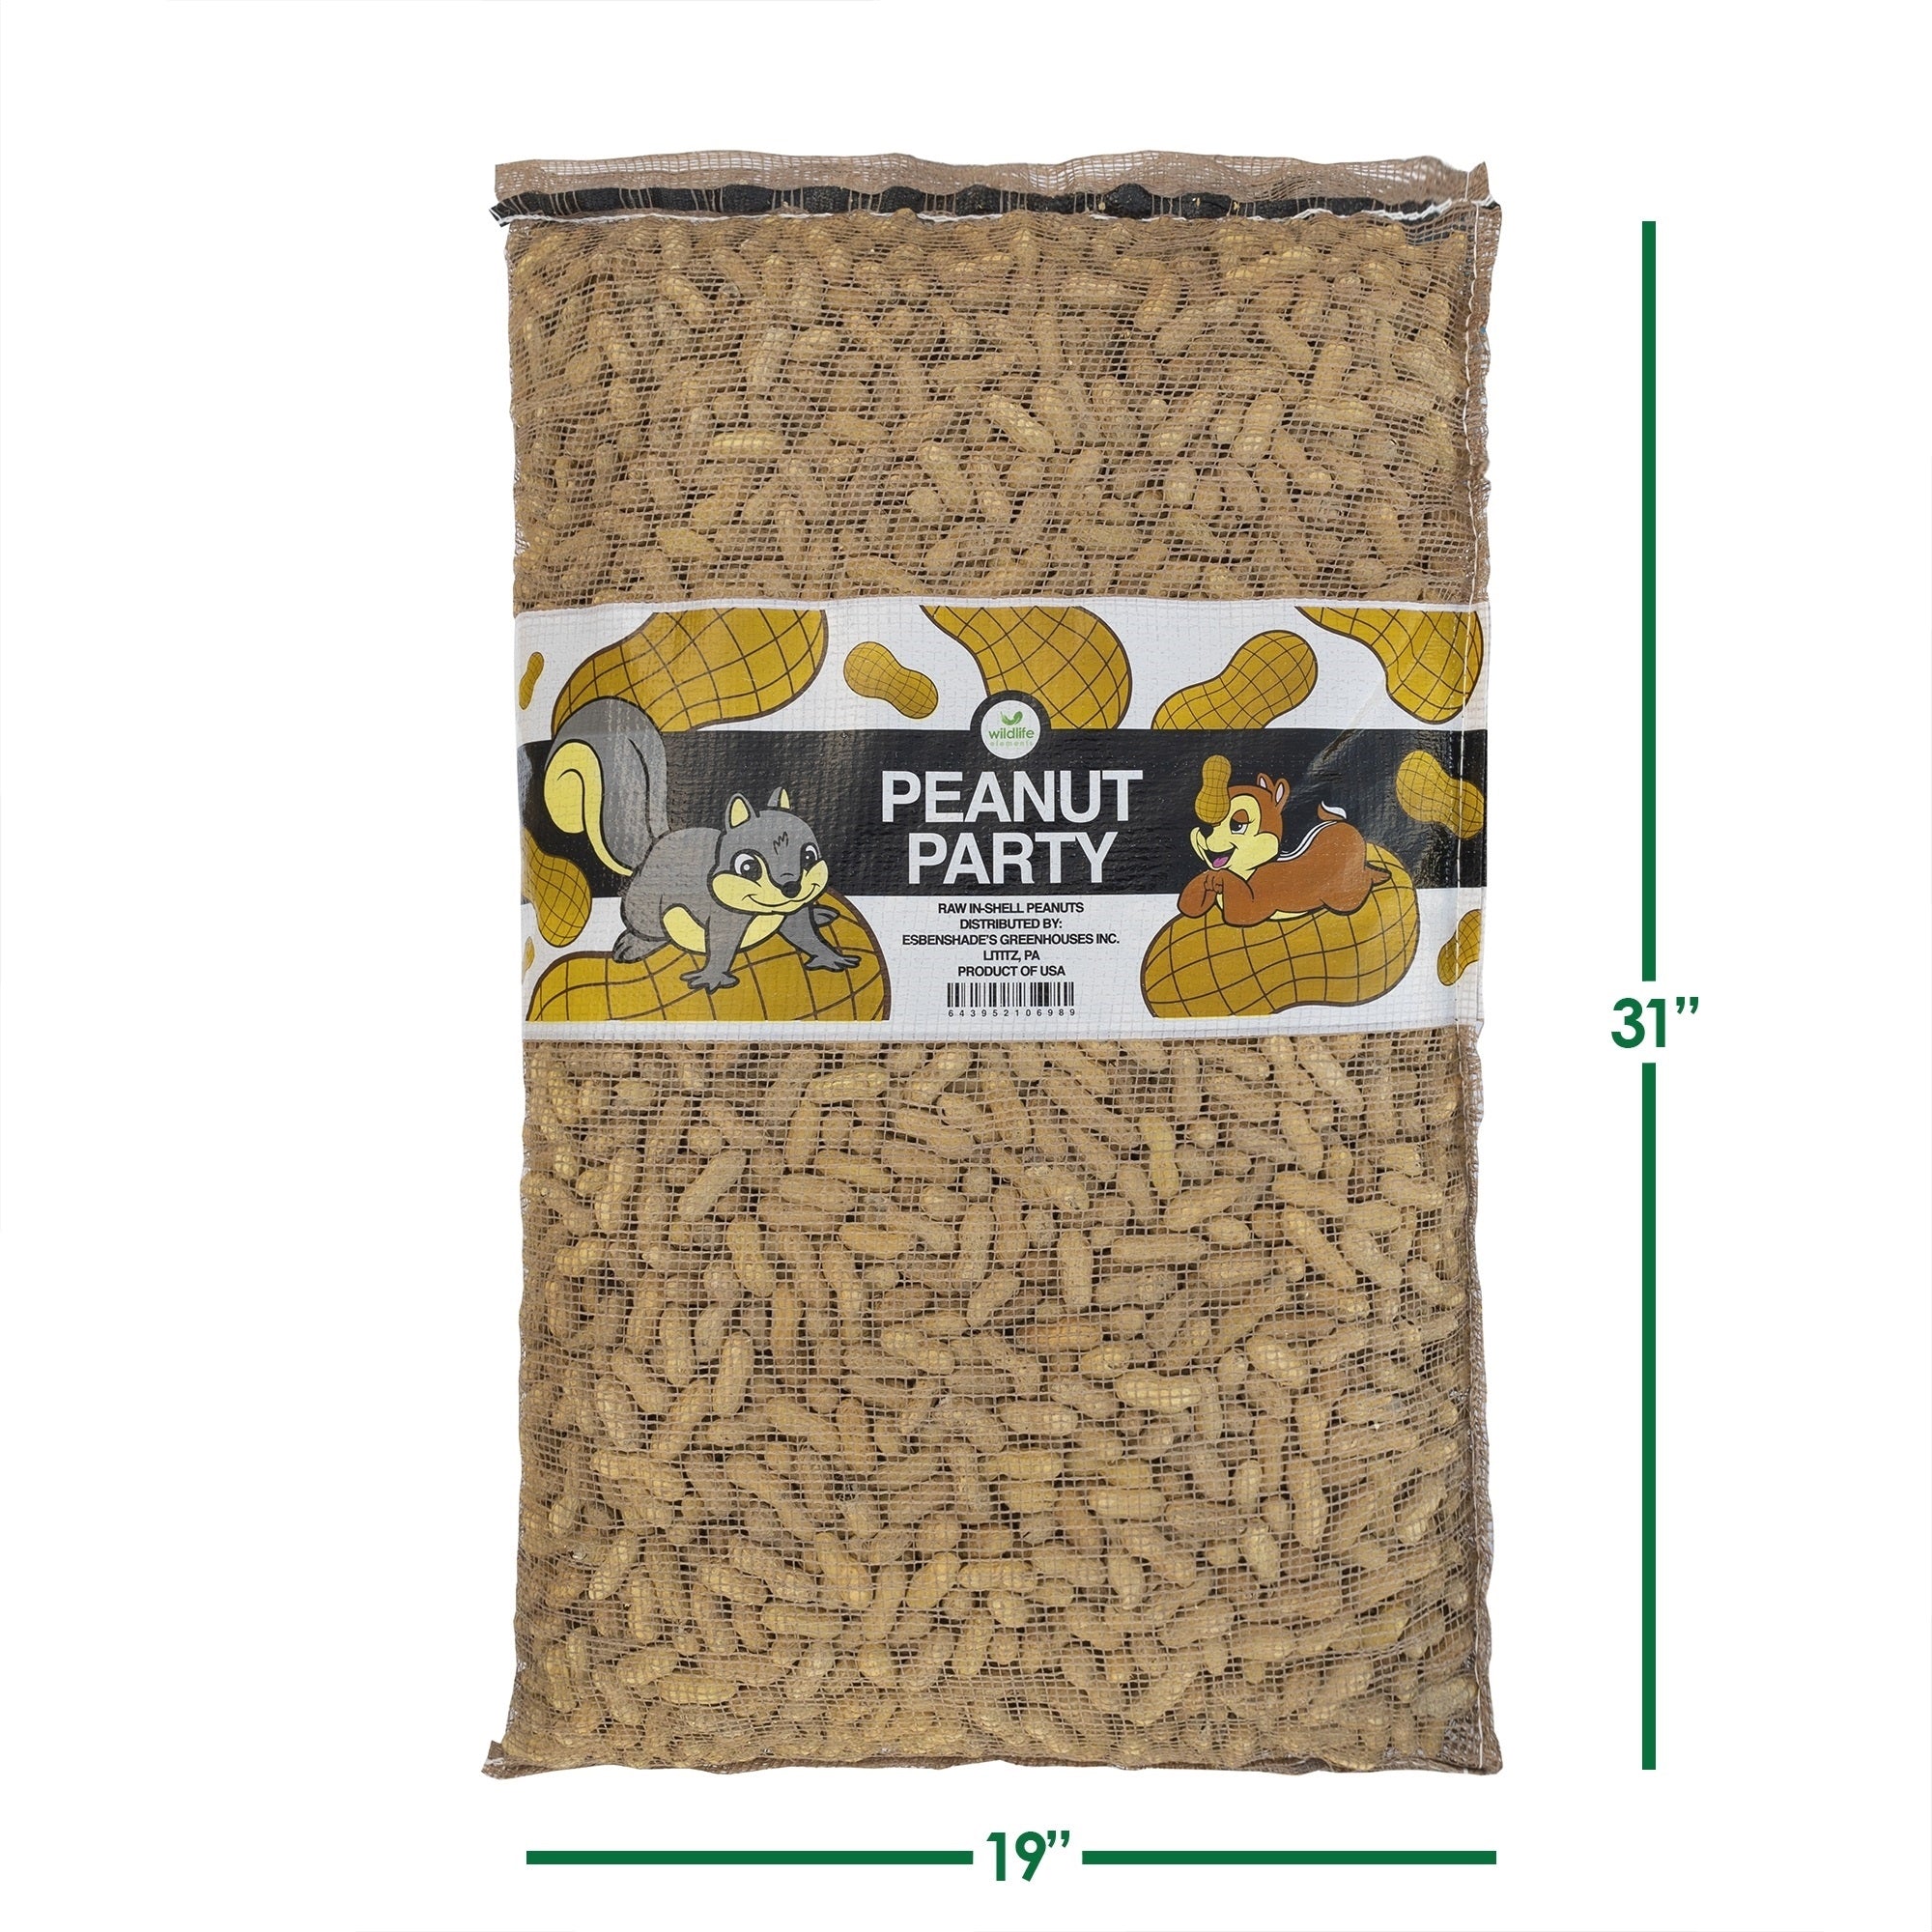 Wildlife Elements Peanut Party In-Shell Peanuts For Birds, Squirrels, Wild Animal Food, 25 Pound Bag